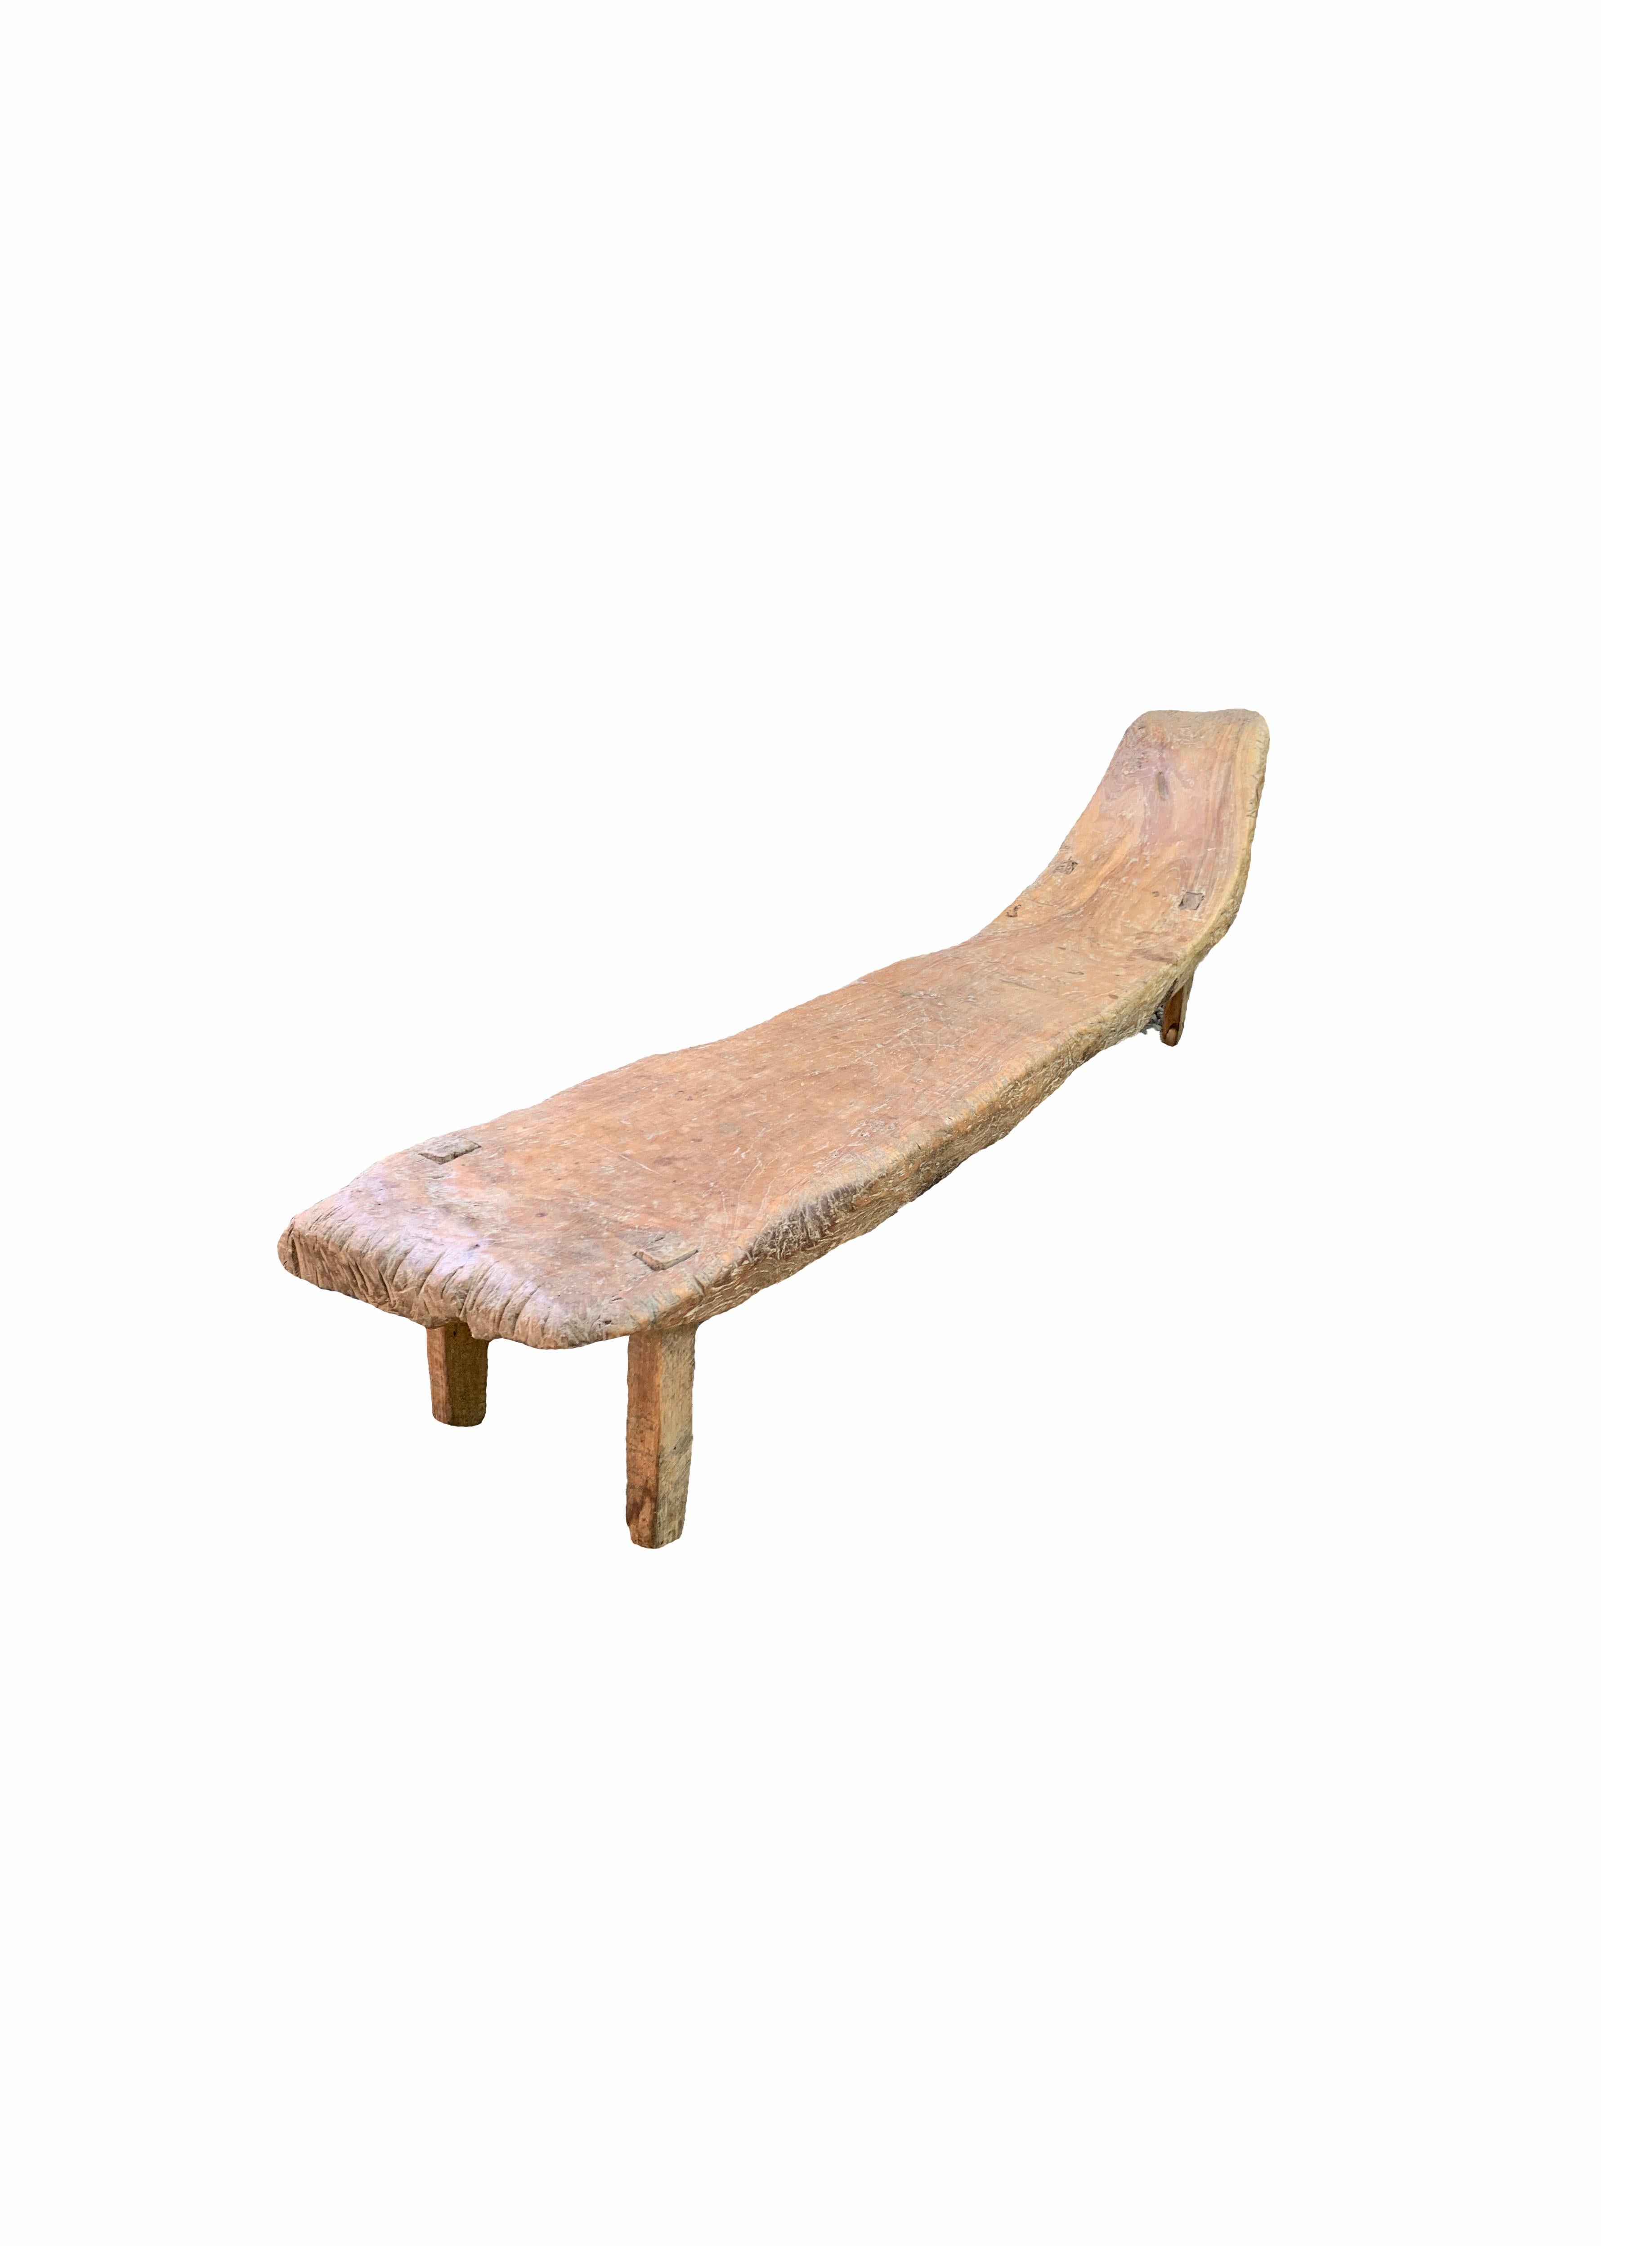 This hand-crafted teak wood low bench originates from the Island of Madura, off the coast of Northeastern Java. Its irregular organic shape contributes to its appeal. This bench dates to the Mid-20th century. 

Dimensions: height to seat 26 cm,